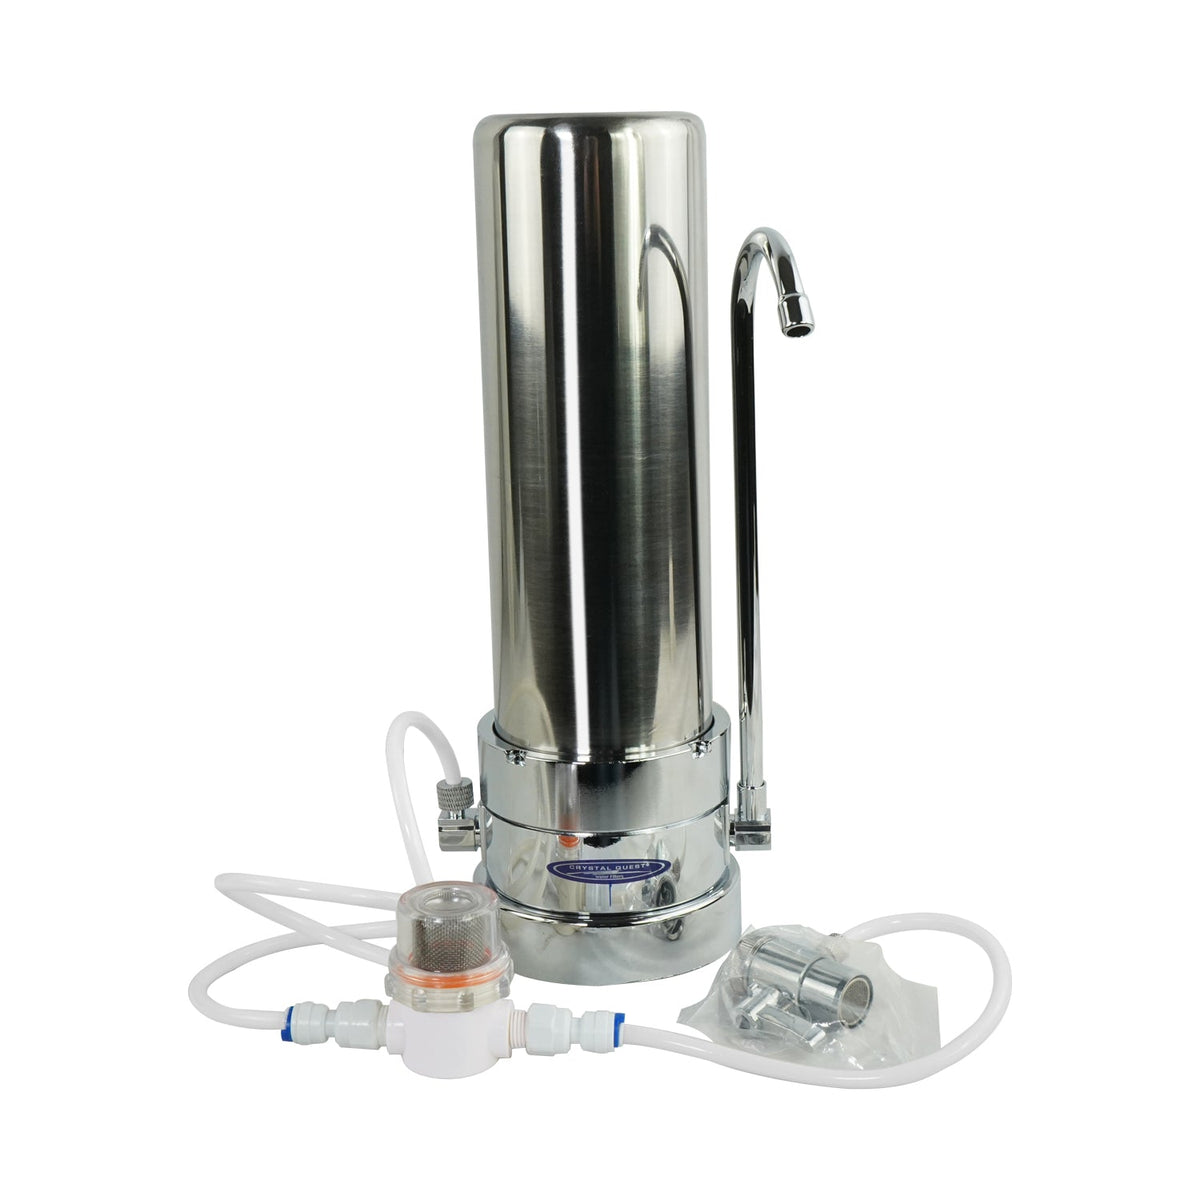 Fluoride Countertop Water Filter System - Countertop Water Filters - Crystal Quest